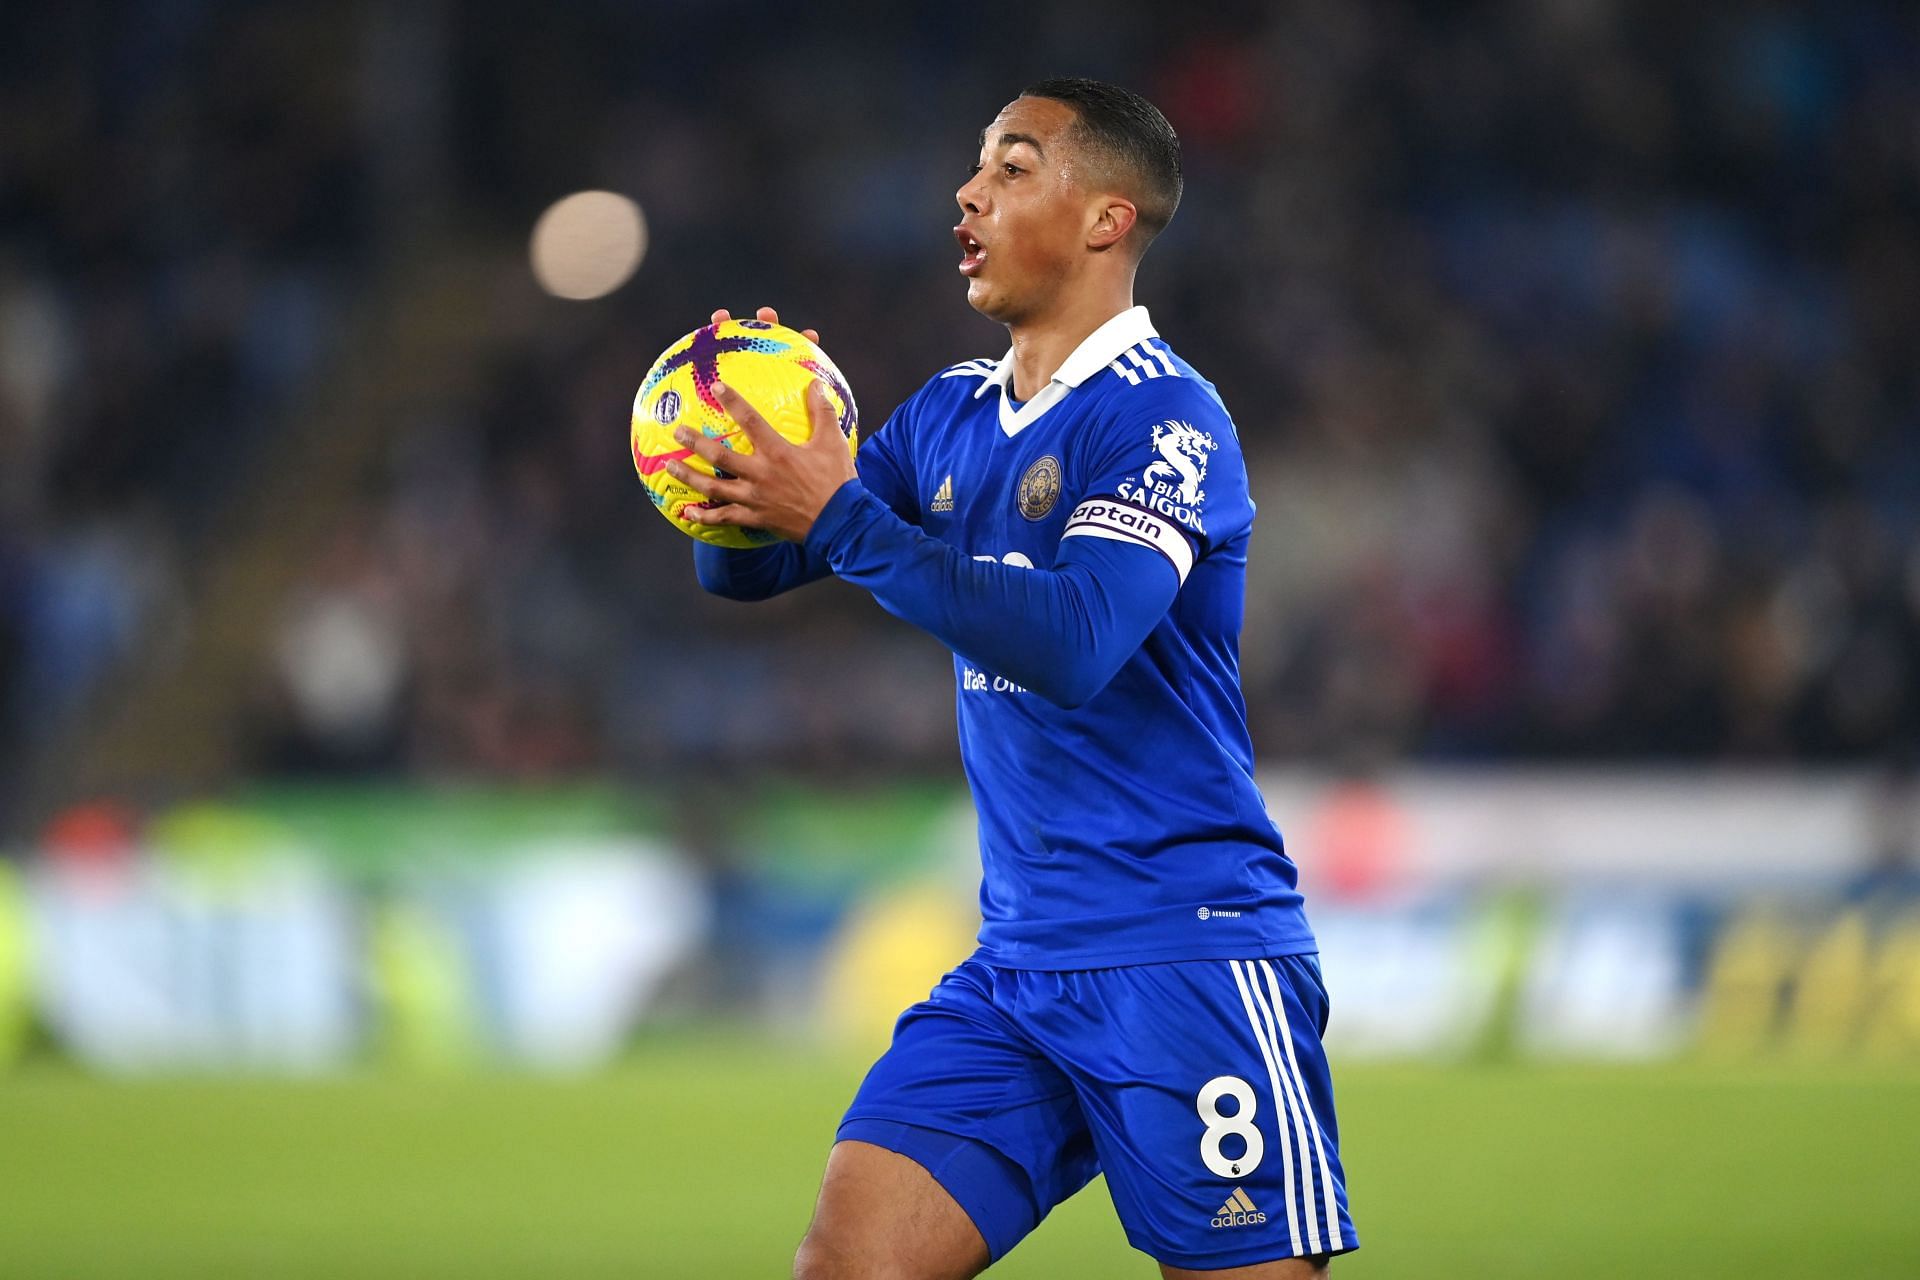 Youri Tielemans has admirers at the Emirates.